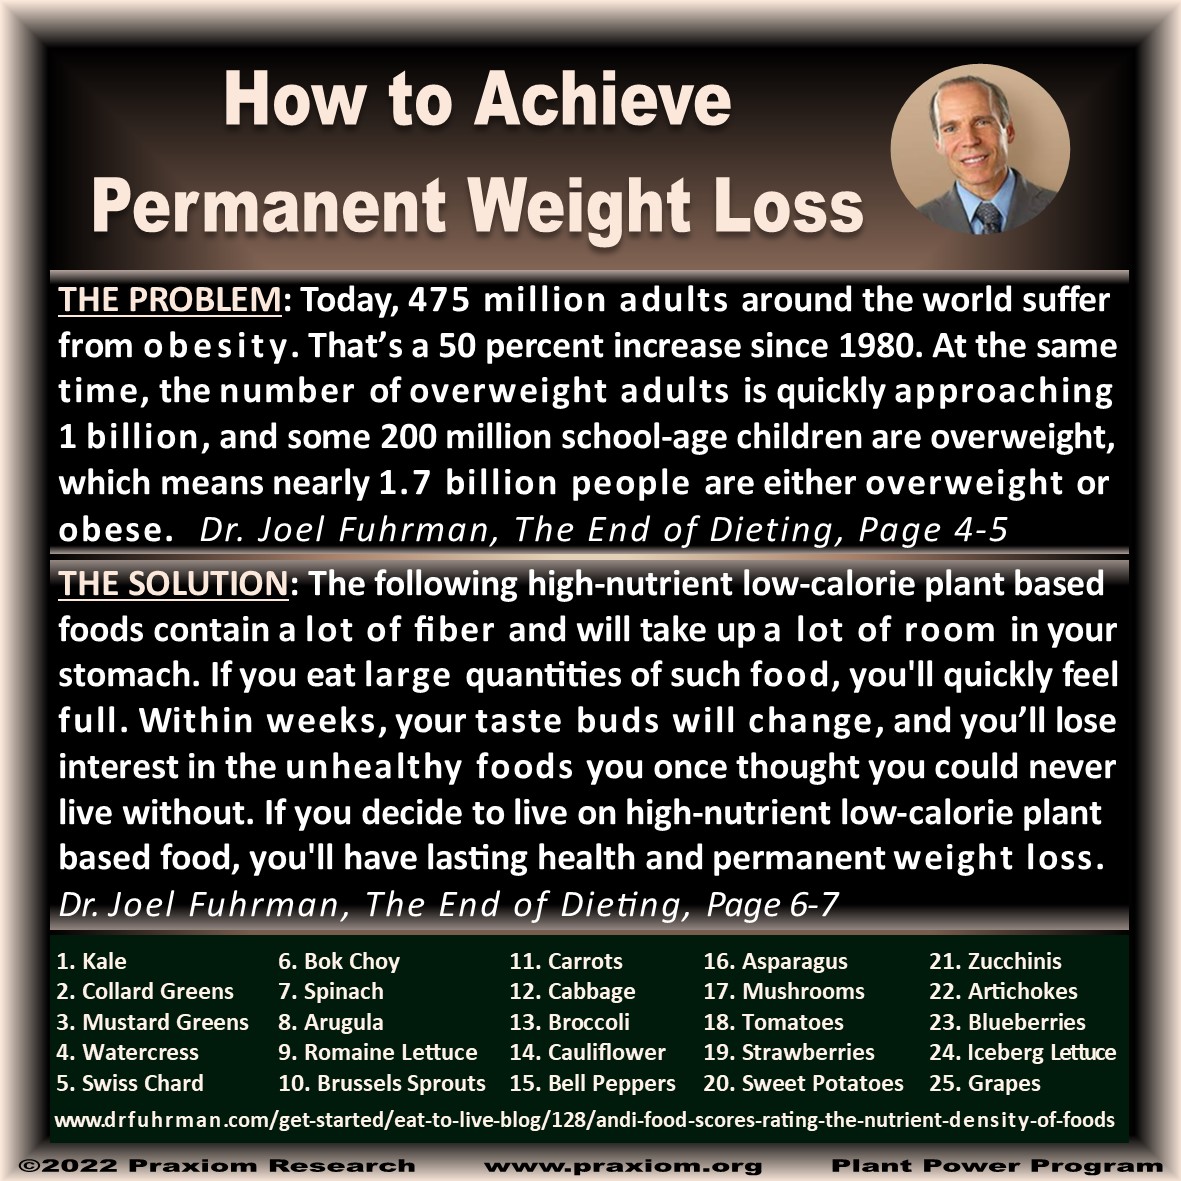 How to Achieve Permanent Weight Loss - Dr. Joel Fuhrman